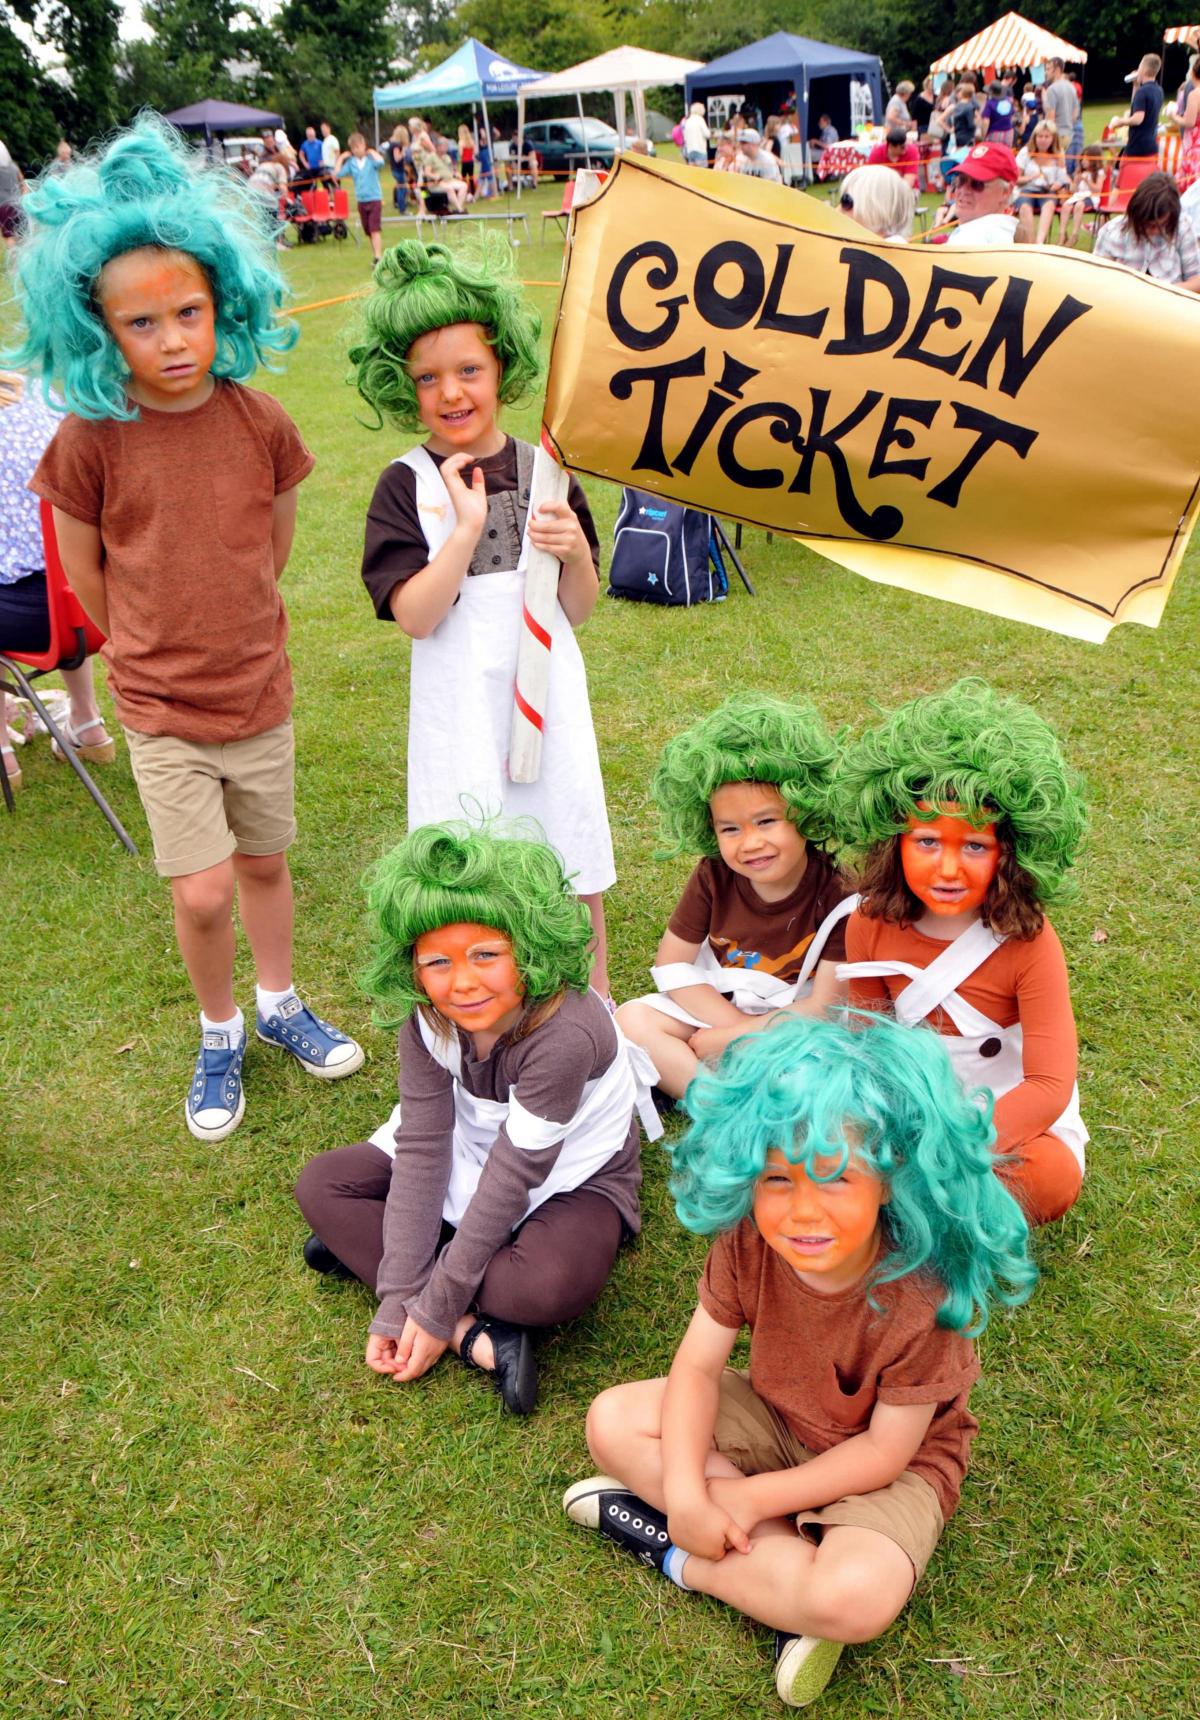 Oompa Loompas from Charlie and the Chocolate Factory.